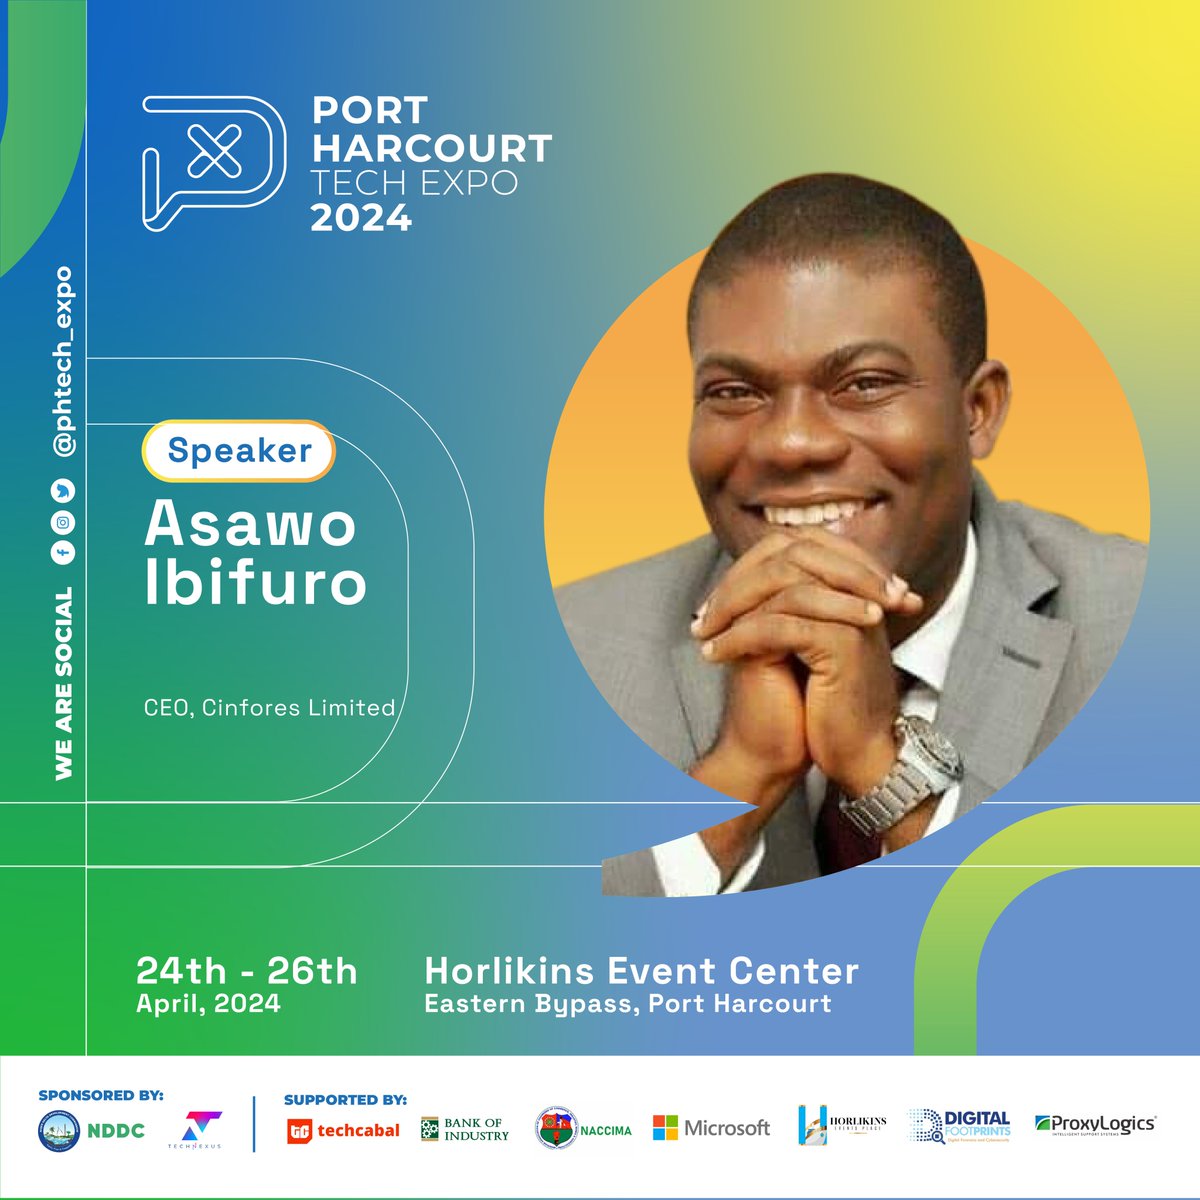 Port Harcourt Tech Expo 2024: Meet  Asawo Ibifuro, CEO of Cinfores Limited

Date: 24th to 26th April, 2024
Venue: Horlikins Event Center, Eastern Bypass Port Harcourt
Time: 10am daily

Register Now at phtechexpo.com/register

#PHTECHEXPO2024  #ICT4D